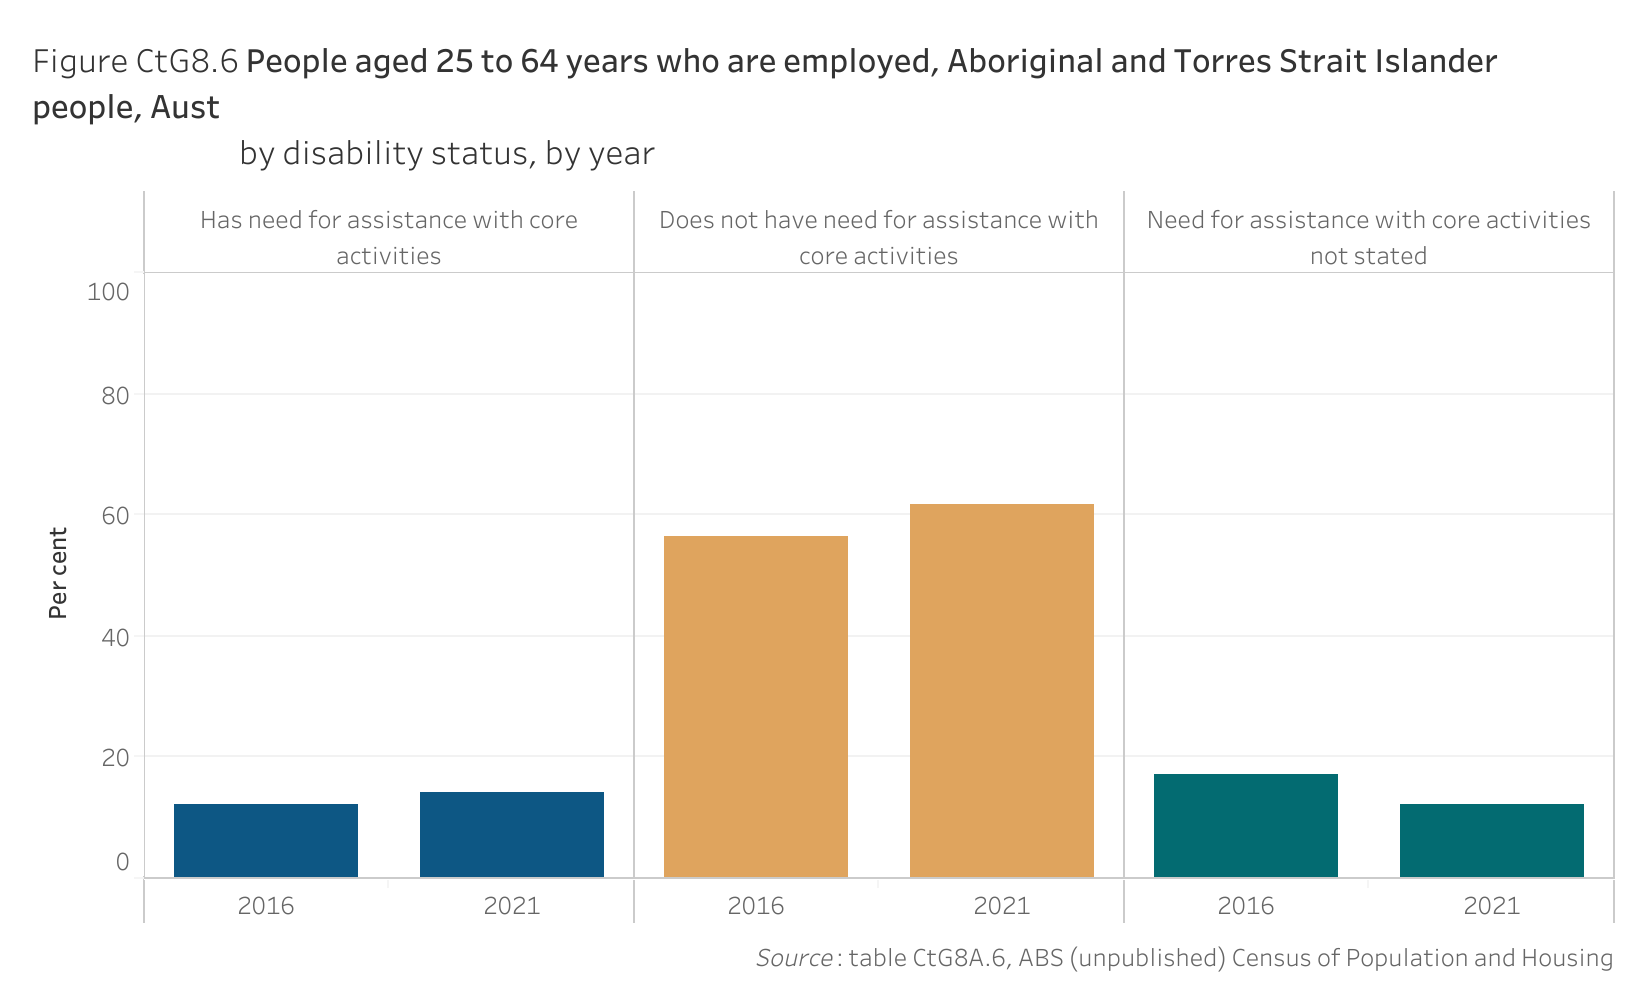 Figure CtG8.6 shows people aged 25 to 64 years who are employed, Aboriginal and Torres Strait Islander people, Australia, by disability status, by year. More details can be found within the text near this image.